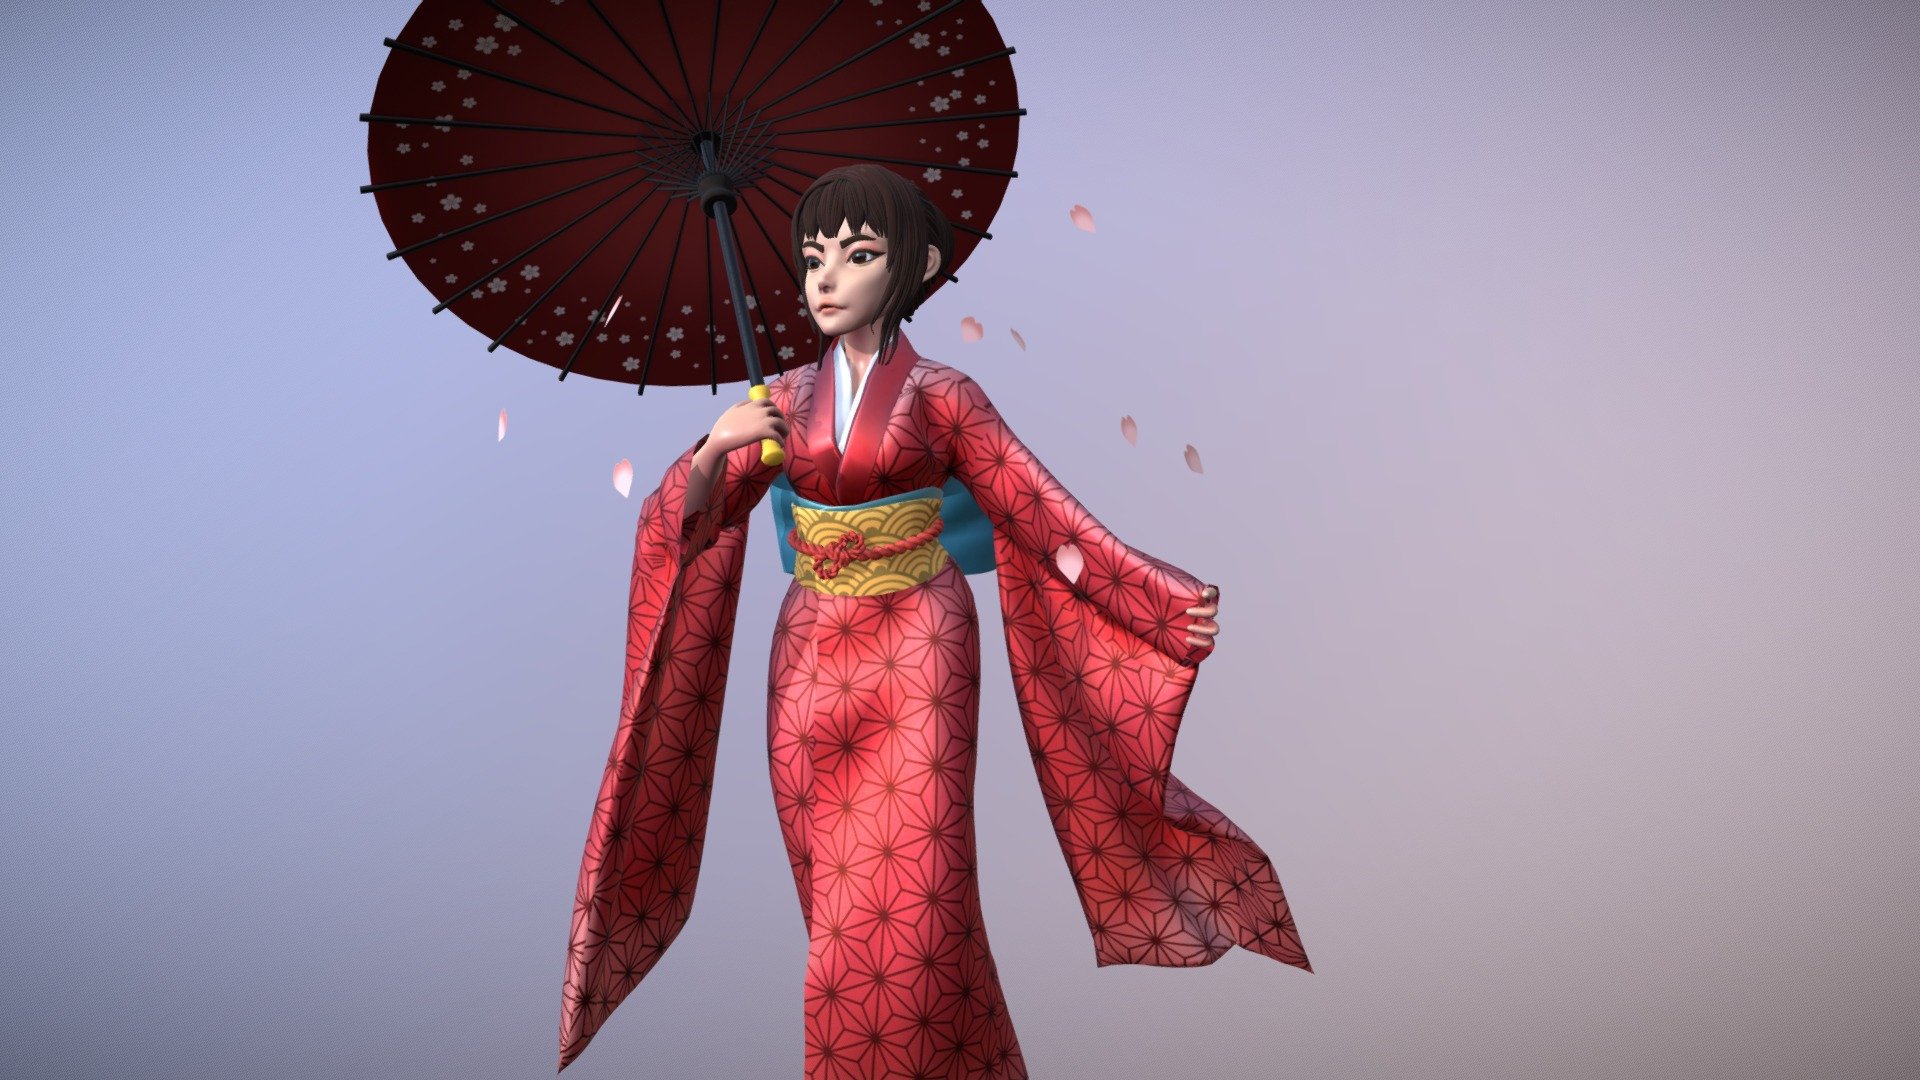 Character of a girl wearing kimono. 
I do the sculpting with zbrush, then use marvelous designer for the kimono, and coloring with substance 3d model